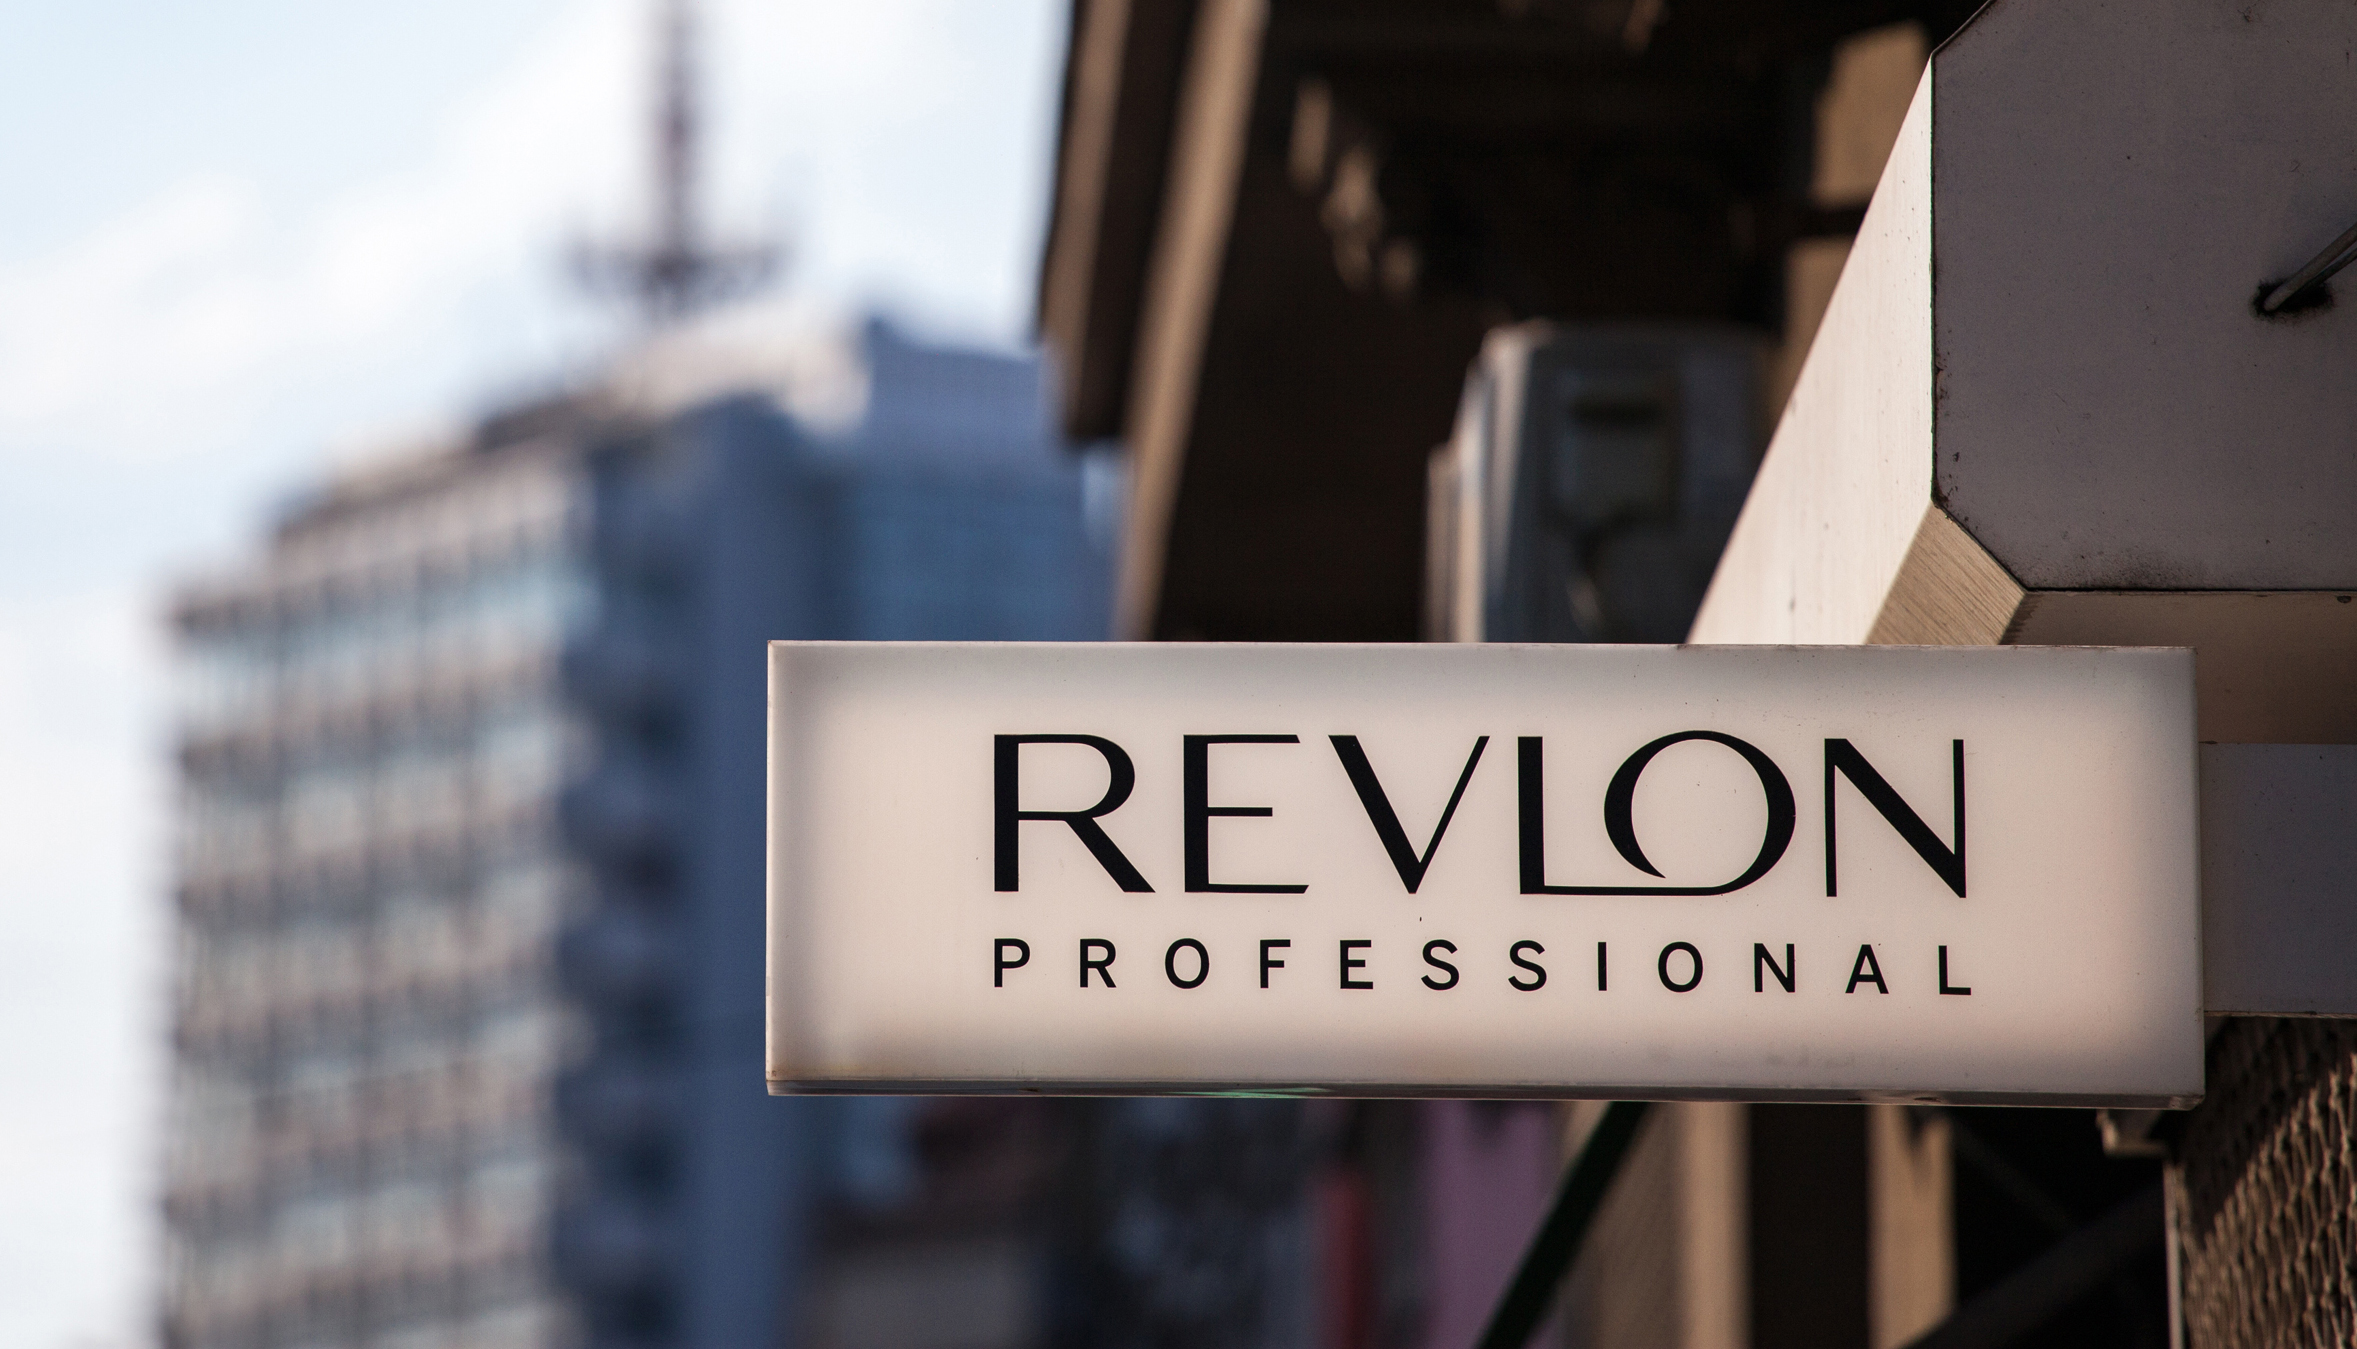 LeaveRussia: Revlon is Doing Business in Russia as Usual